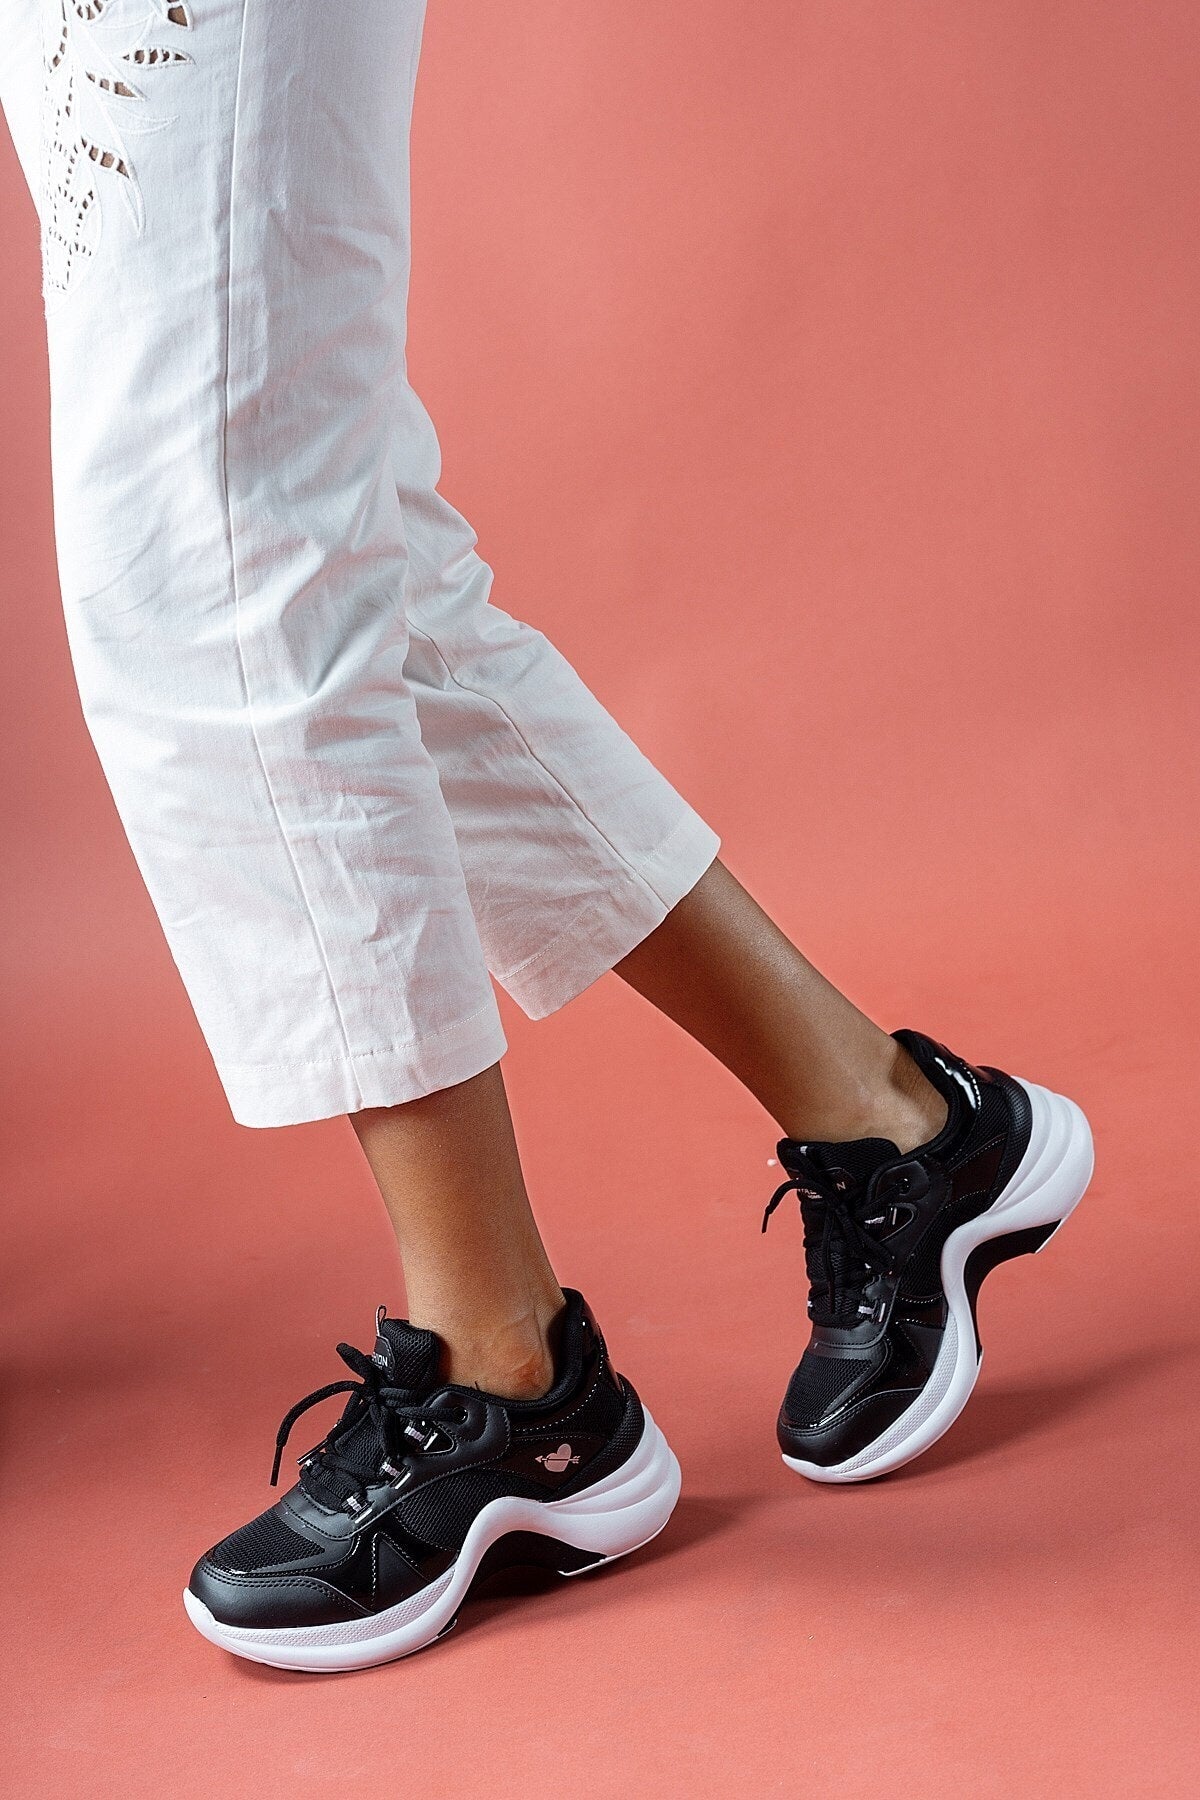 Black and white woman sneaker